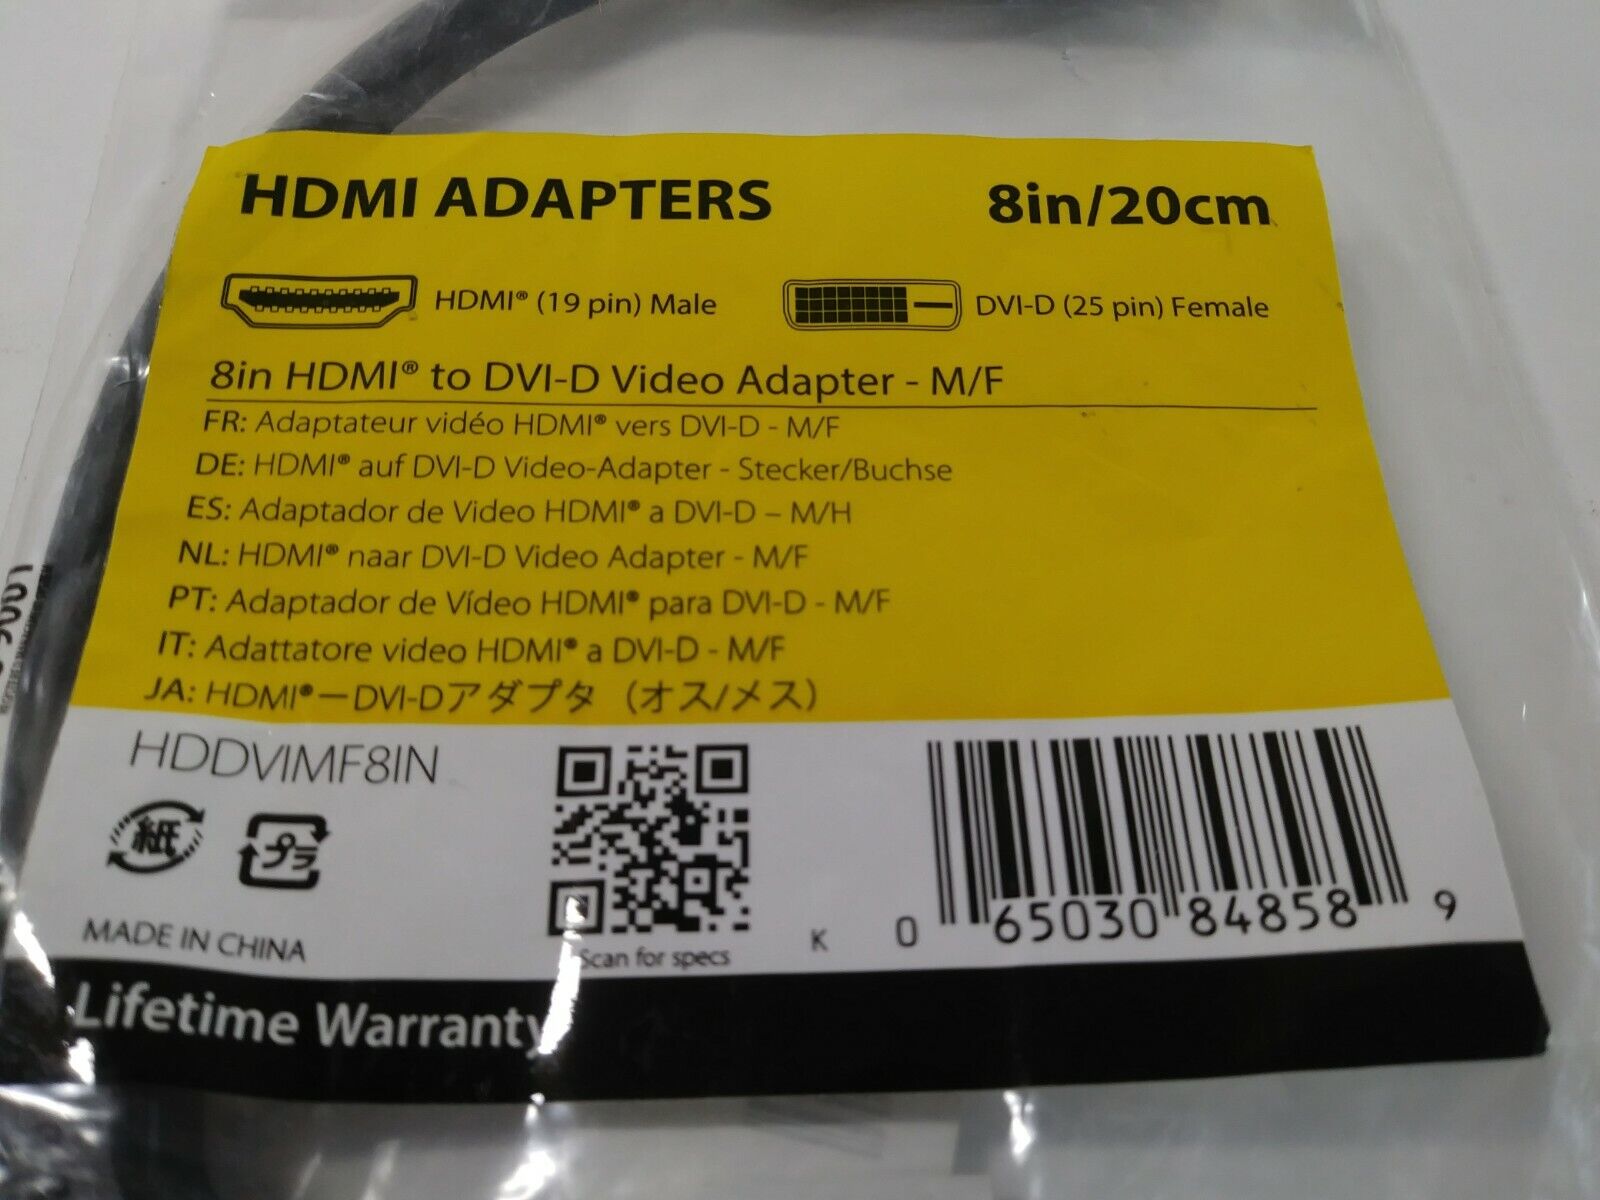 StarTech HDDVIMF8IN HDMI Adapter 8in/20cm HDMI To DVI-D Video Adapter M/F